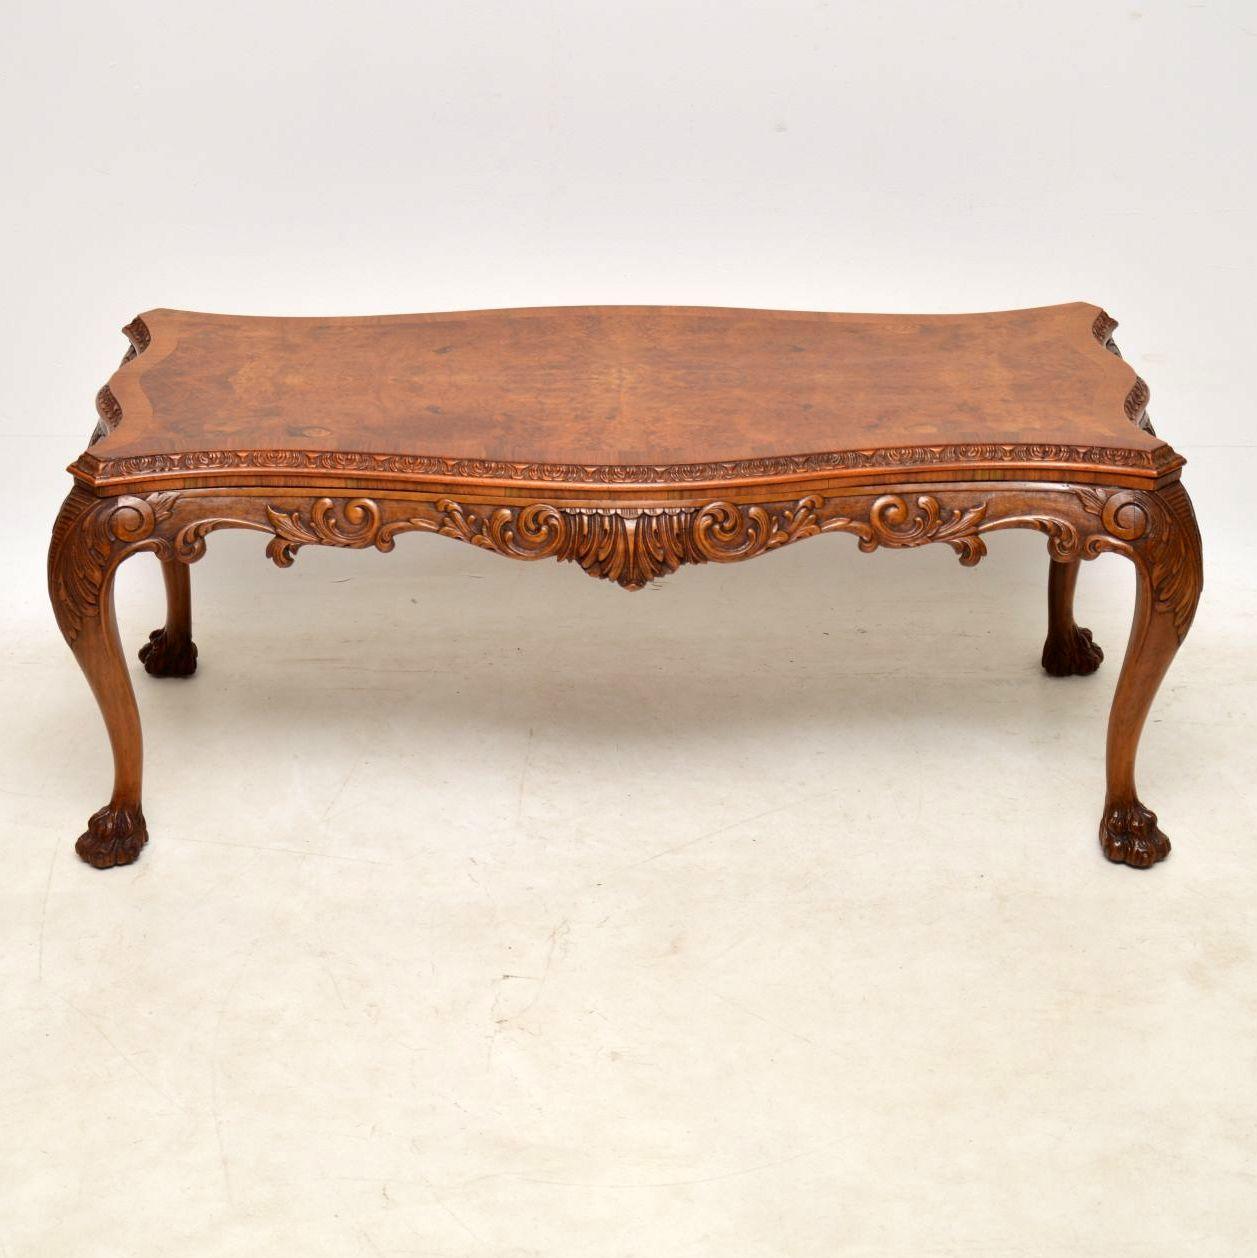 This very impressive antique walnut coffee table is of very high quality and has fabulous carvings all-over. Please enlarge all the images to appreciate this. The shaped top is burr walnut and is crossbanded. It’s carved all around the sides and the